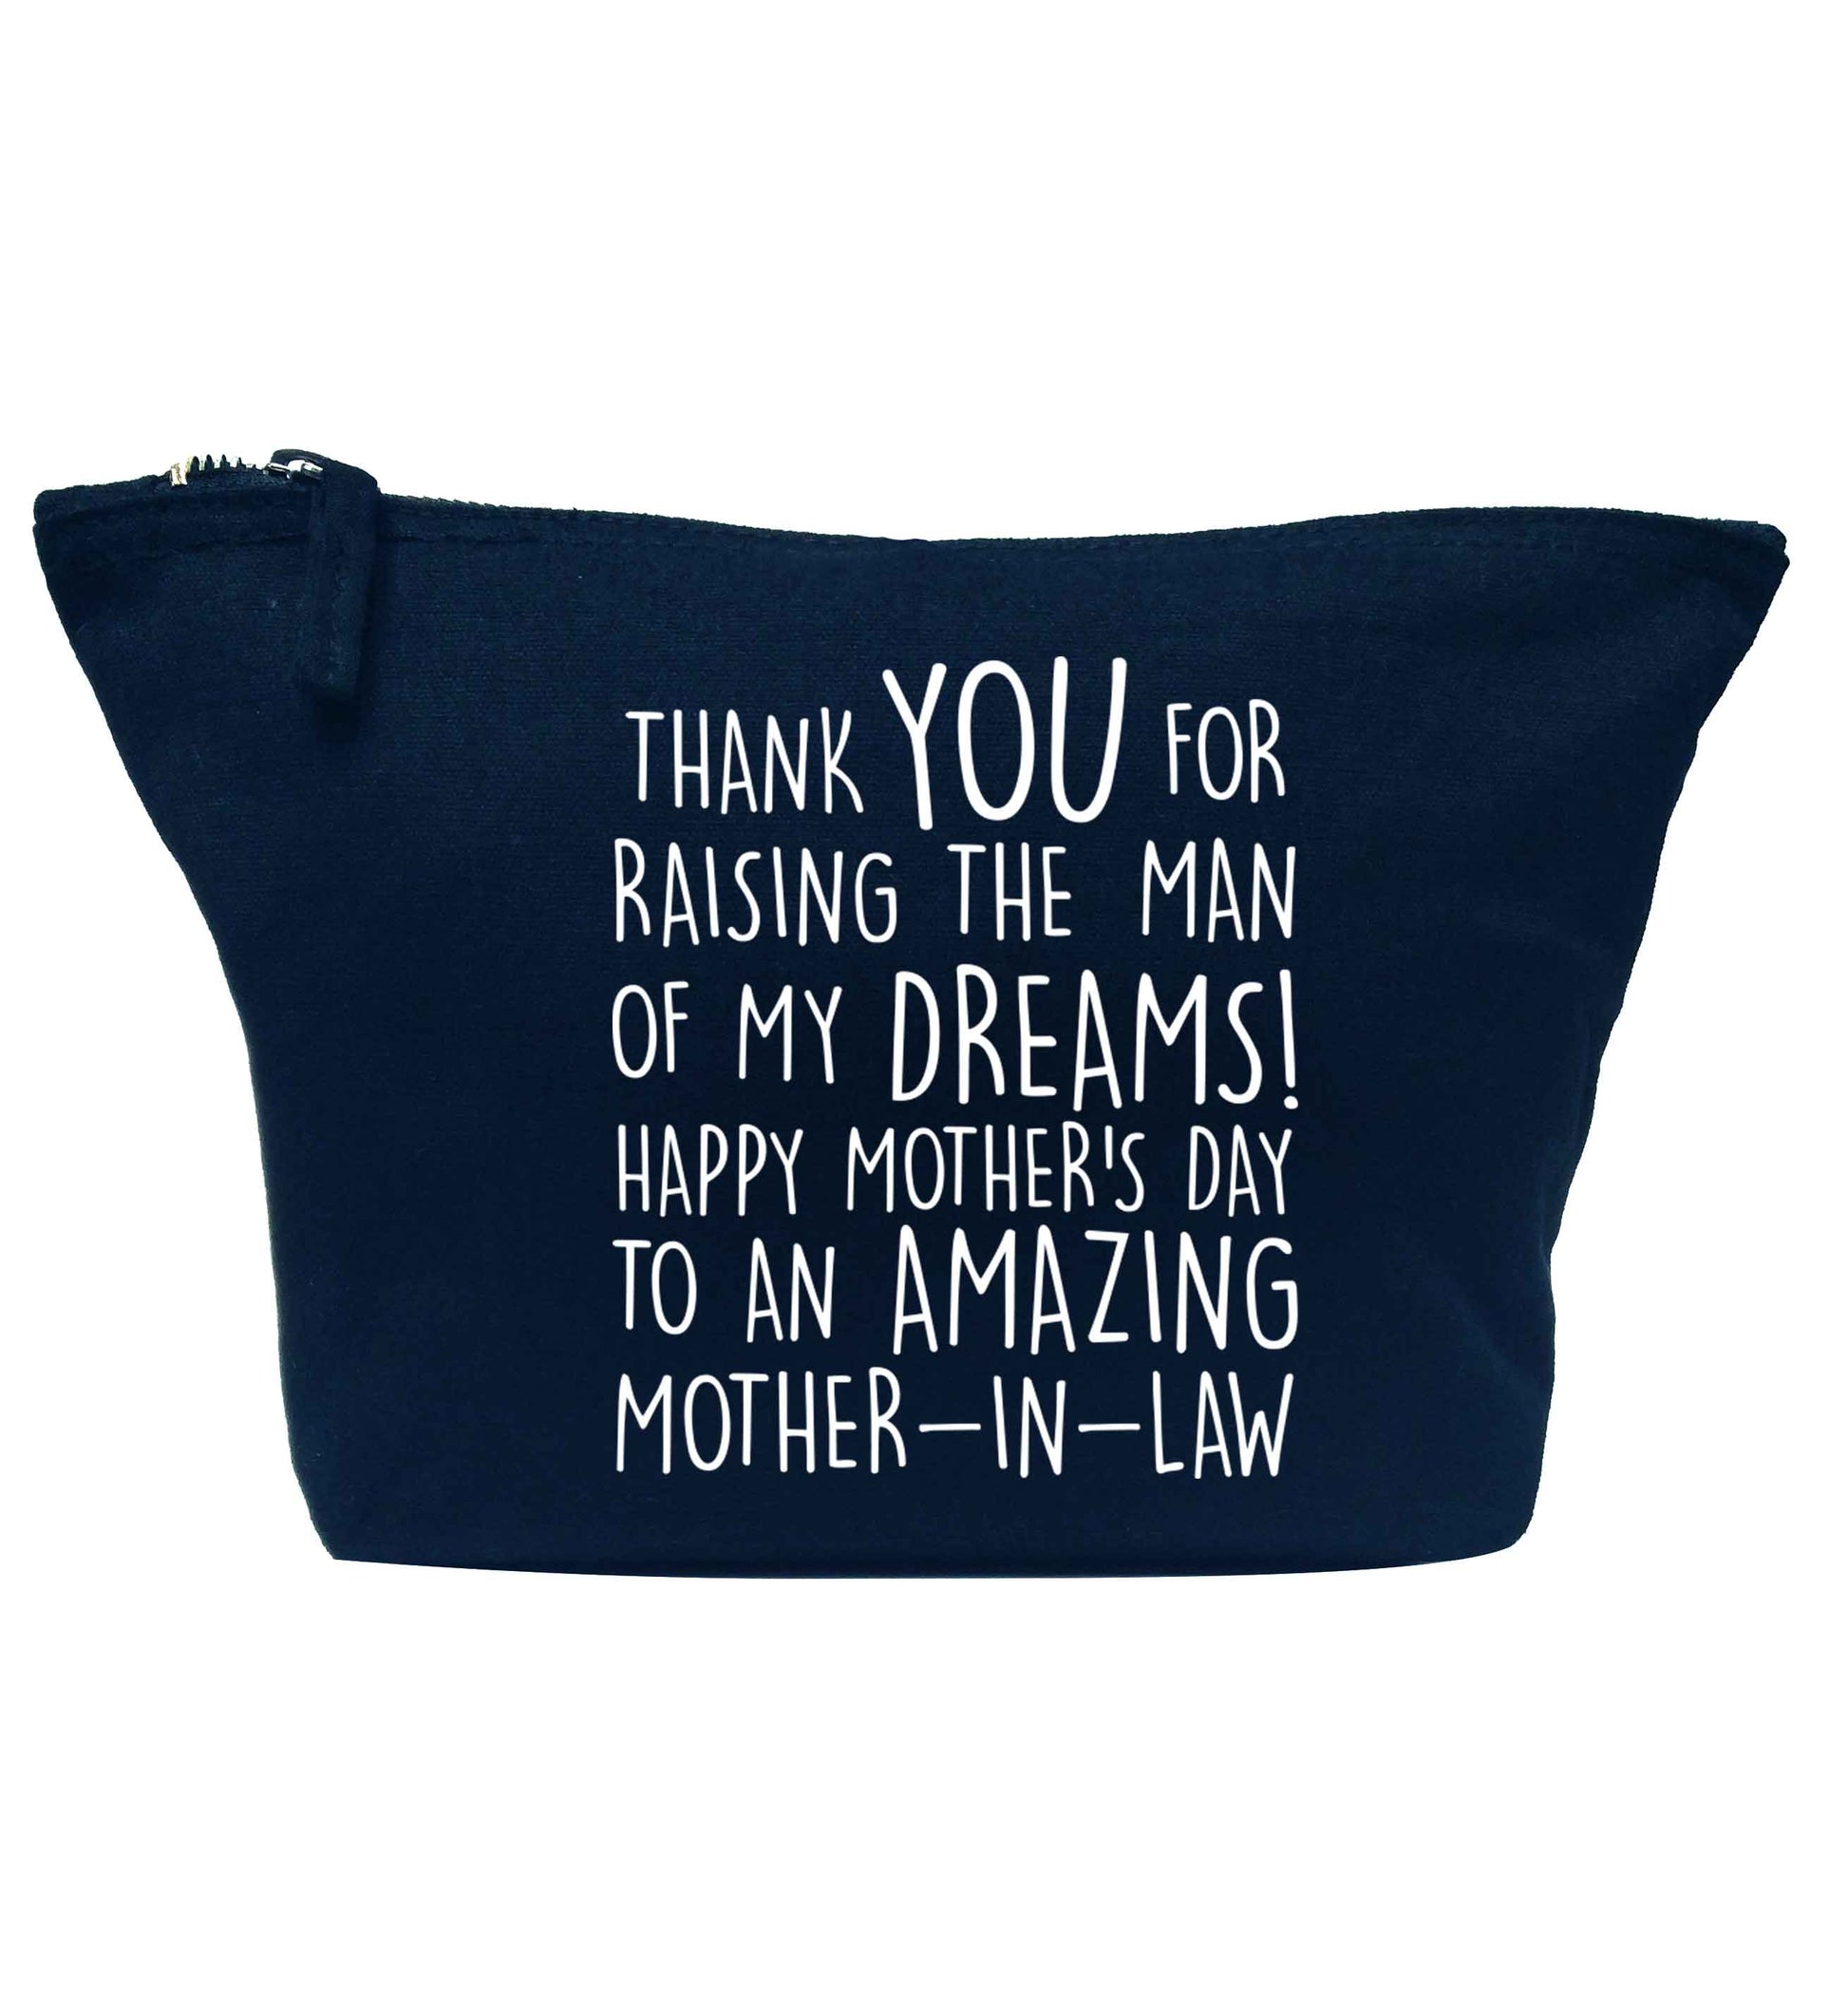 Raising the man of my dreams mother's day mother-in-law navy makeup bag